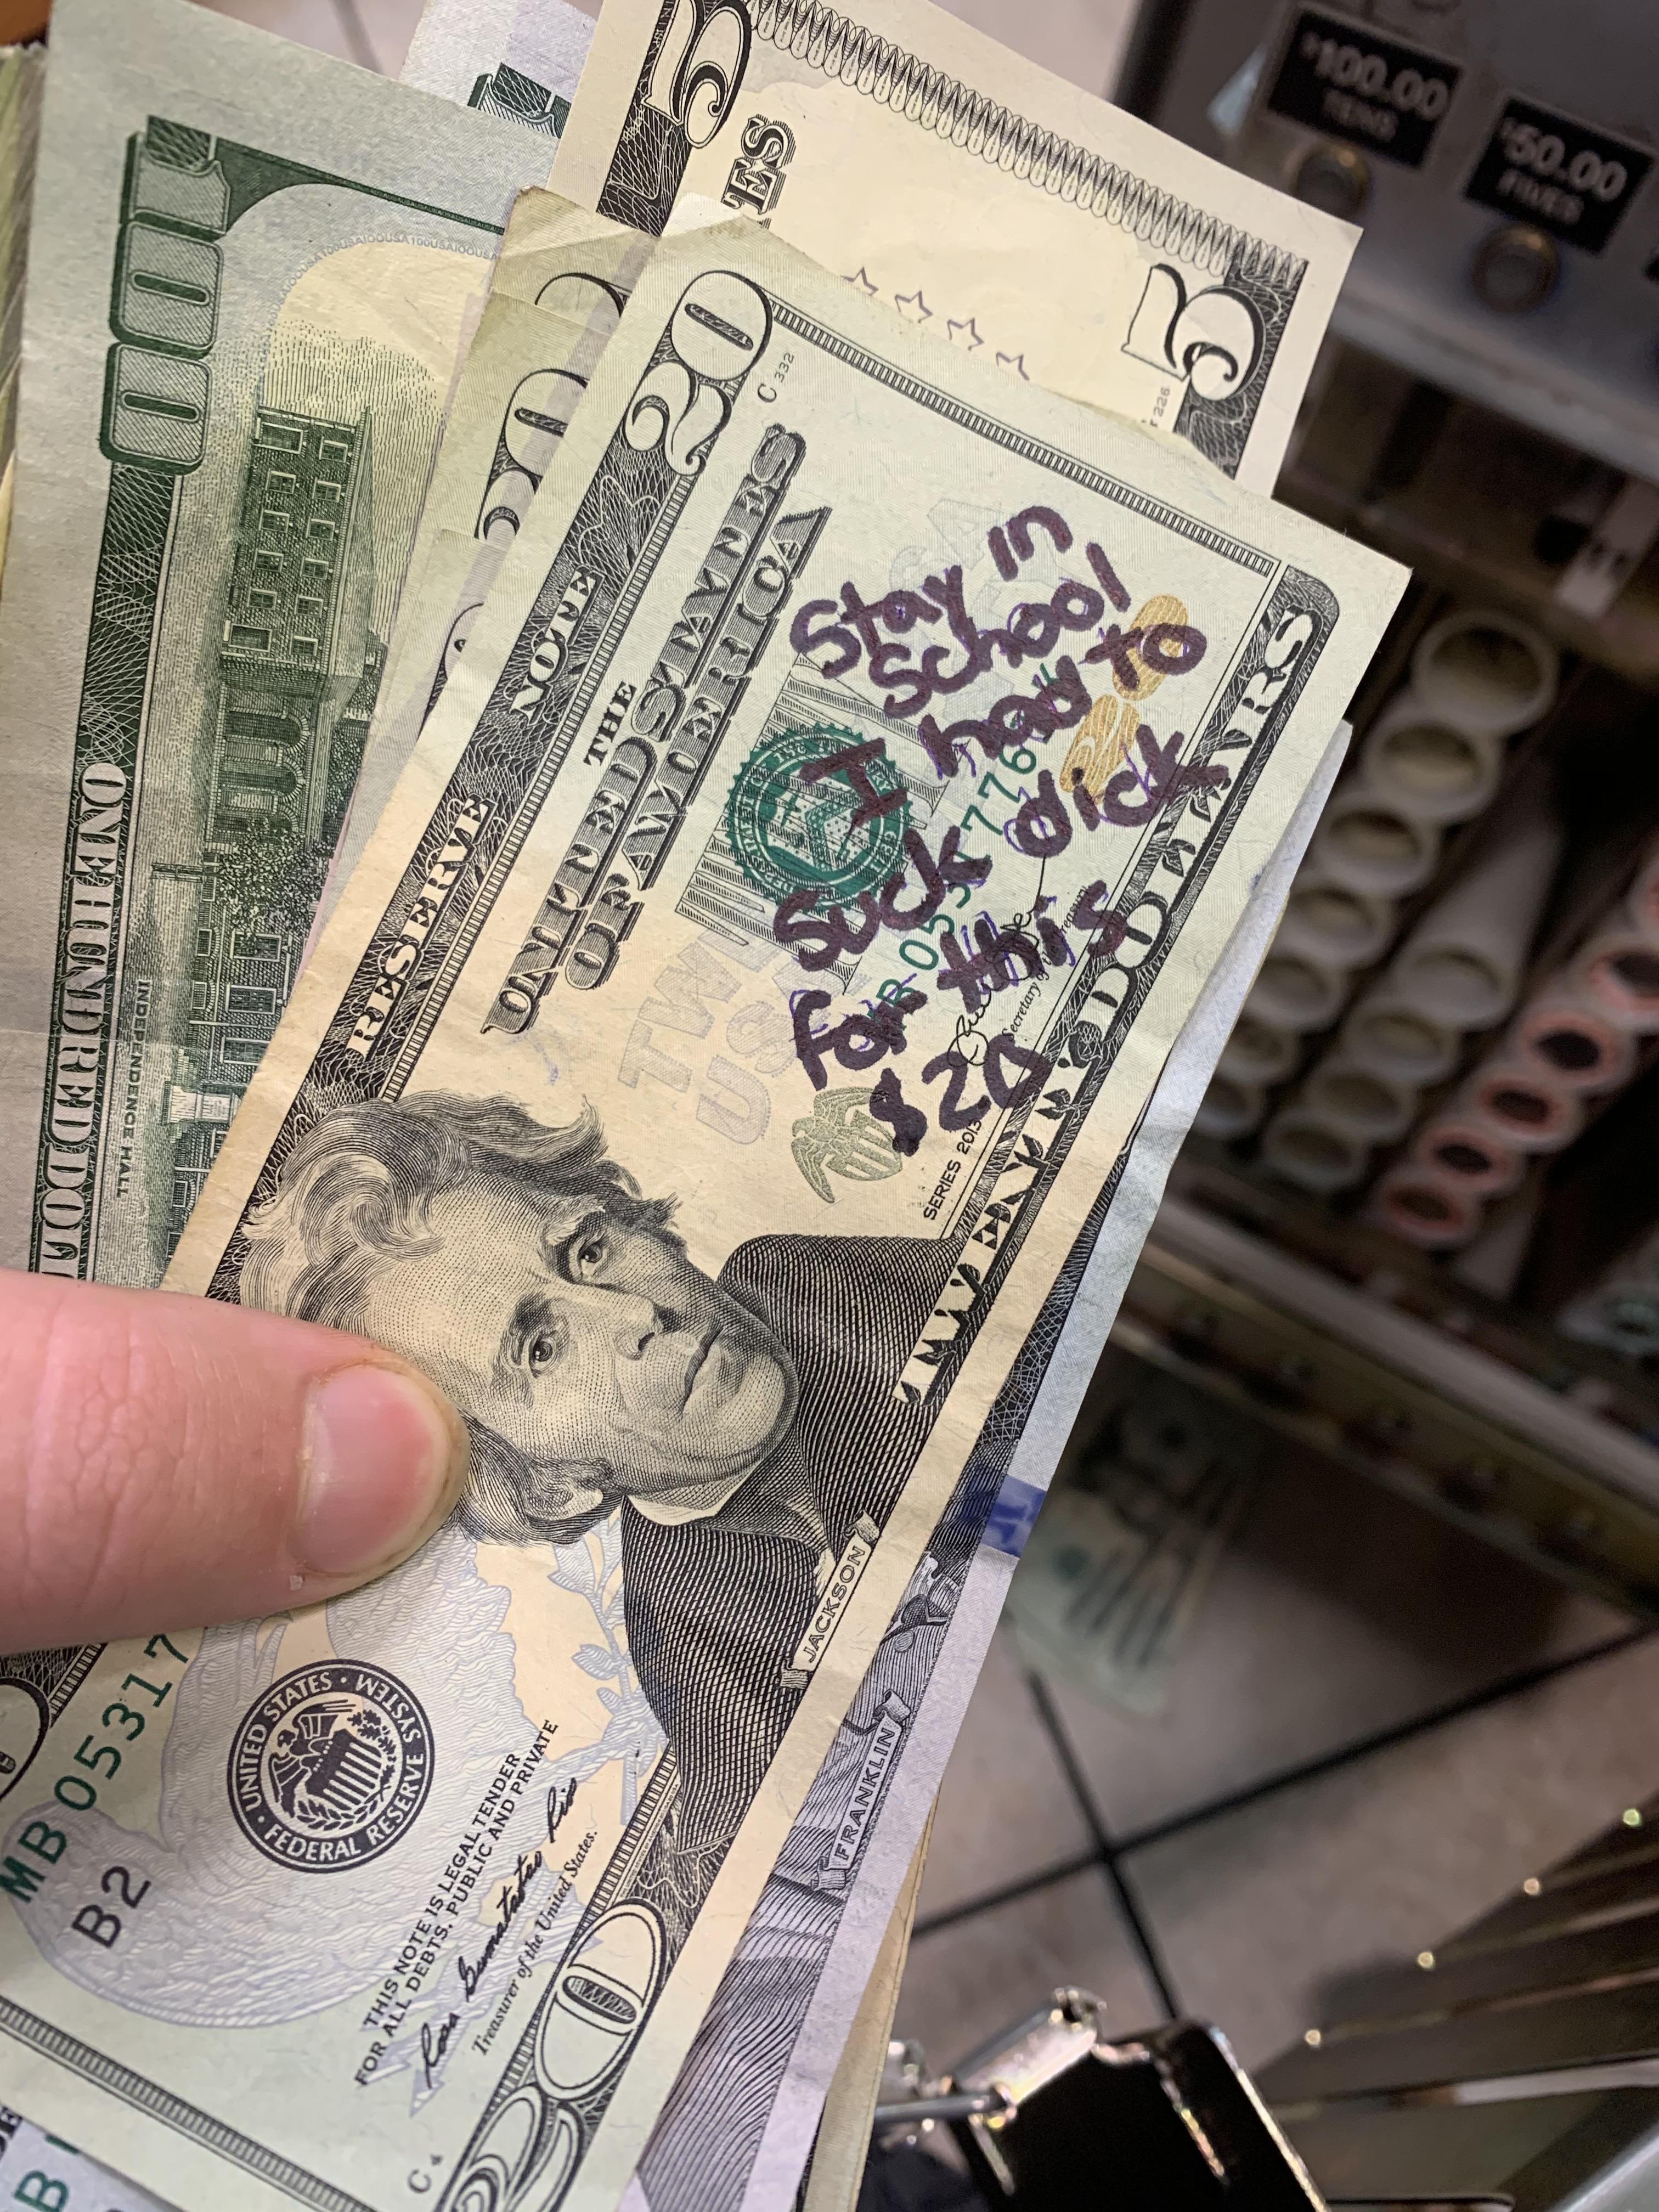 I work for a Gas Station and while preparing a deposit this little gem passed me by...